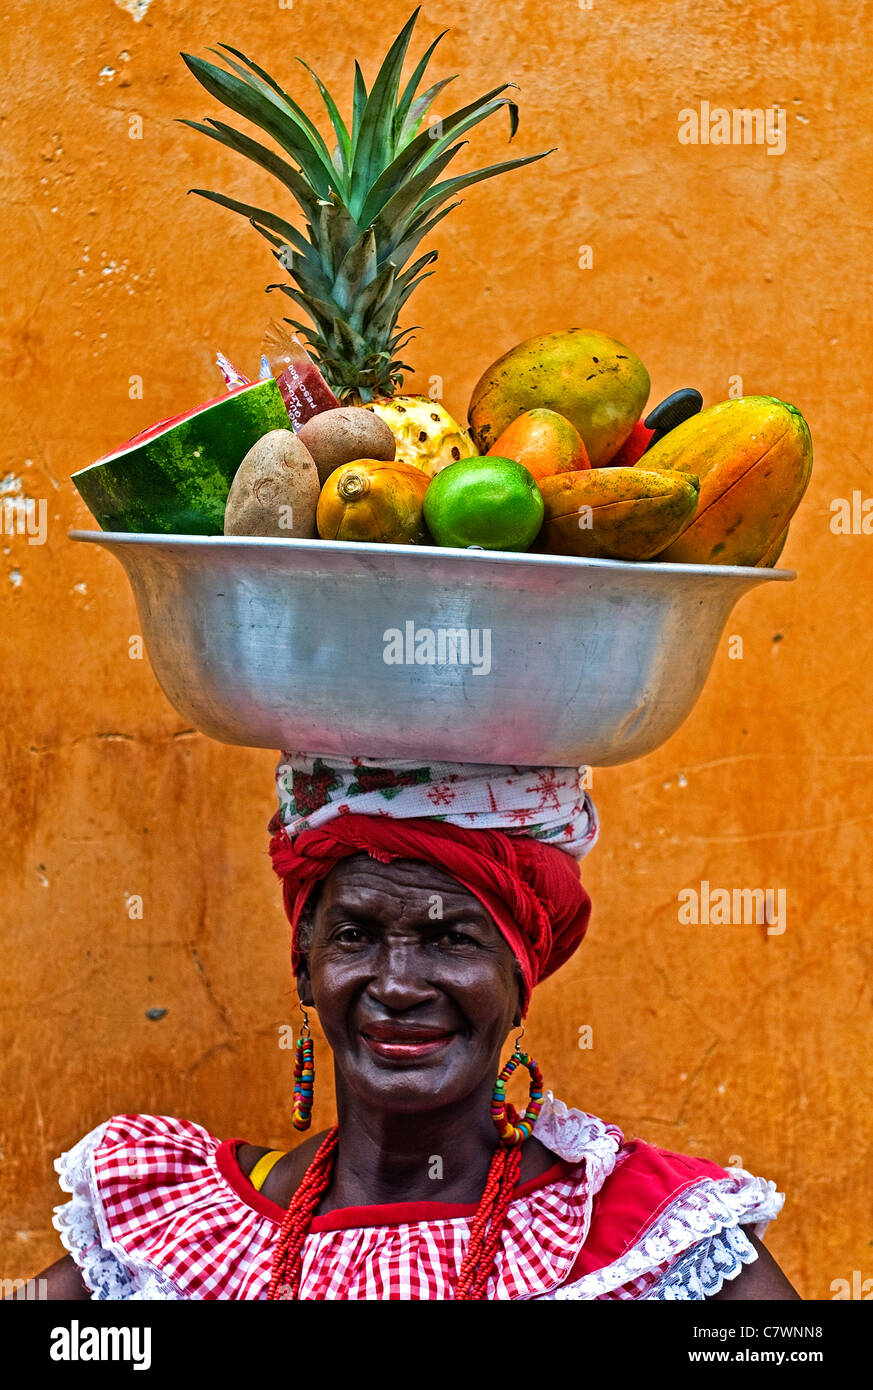 Unidentified Palenquera woman sell fruits in Cartagena, Colombia on December 21 2010, Palenqueras are a unique African descendan Stock Photo